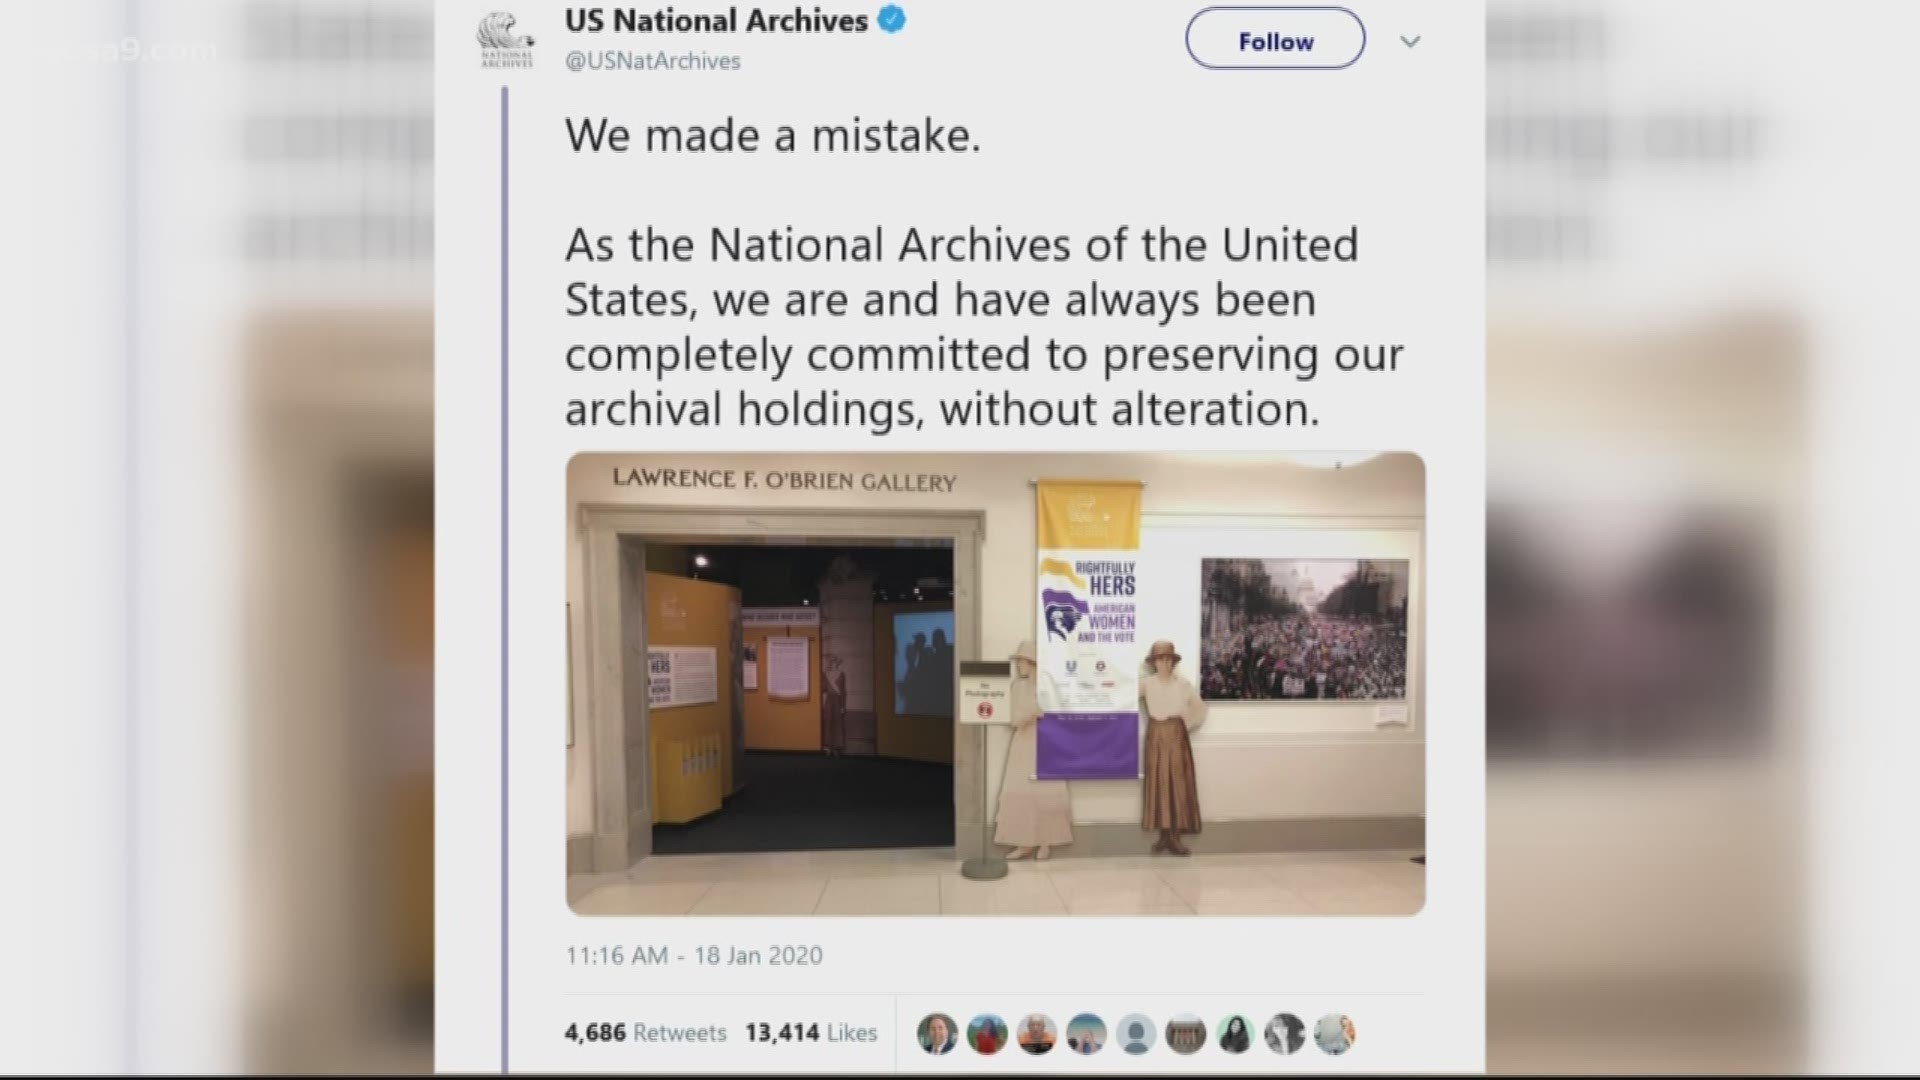 Officials with the Archives have since removed the photo, which purposefully blurred signs held by protesters that were critical of President Donald Trump.